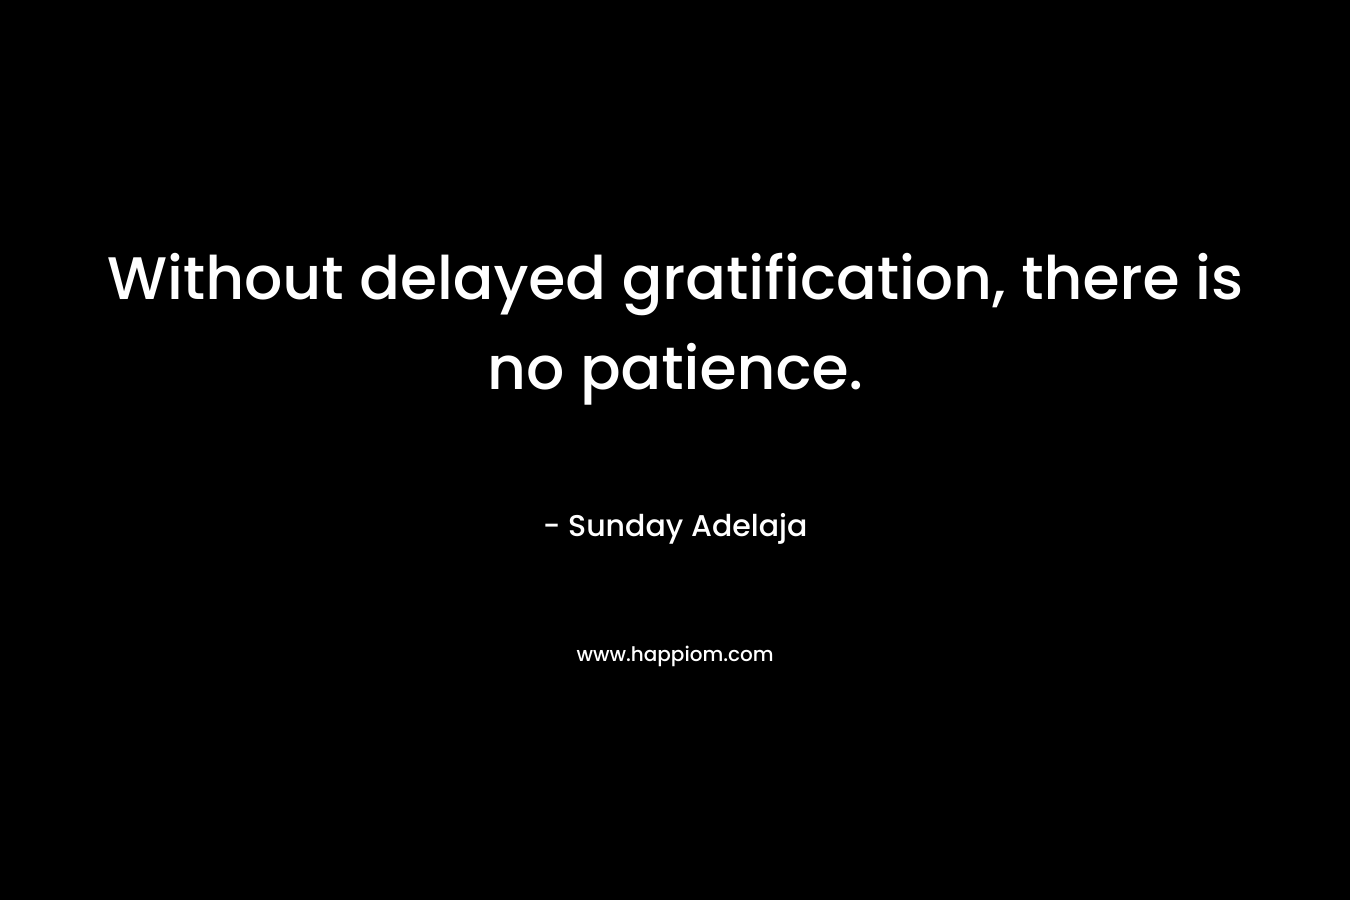 Without delayed gratification, there is no patience.